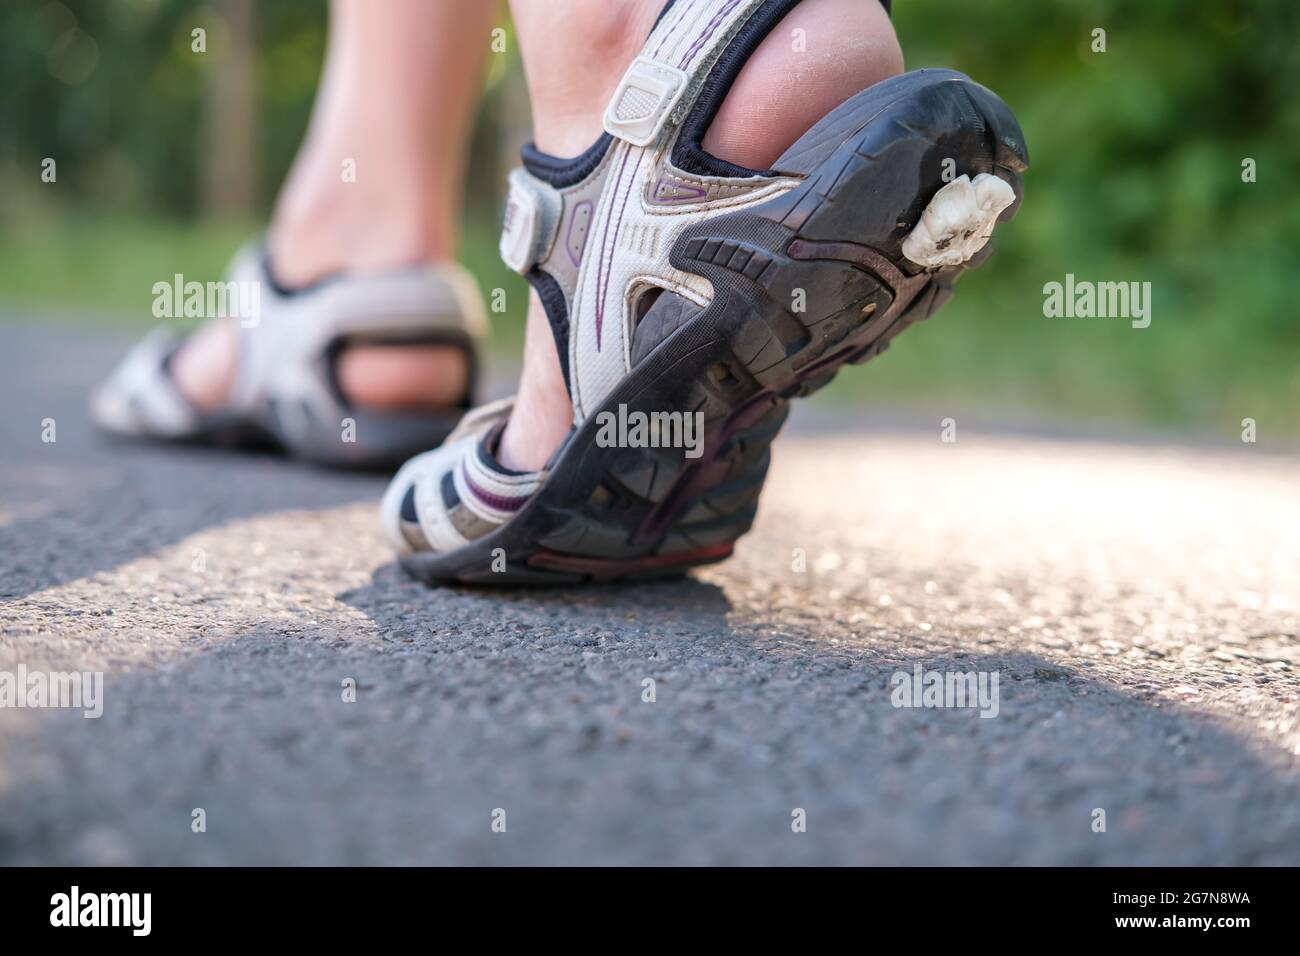 Chewing gum stuck to the soles of sandals on a summer day.  Stock Photo